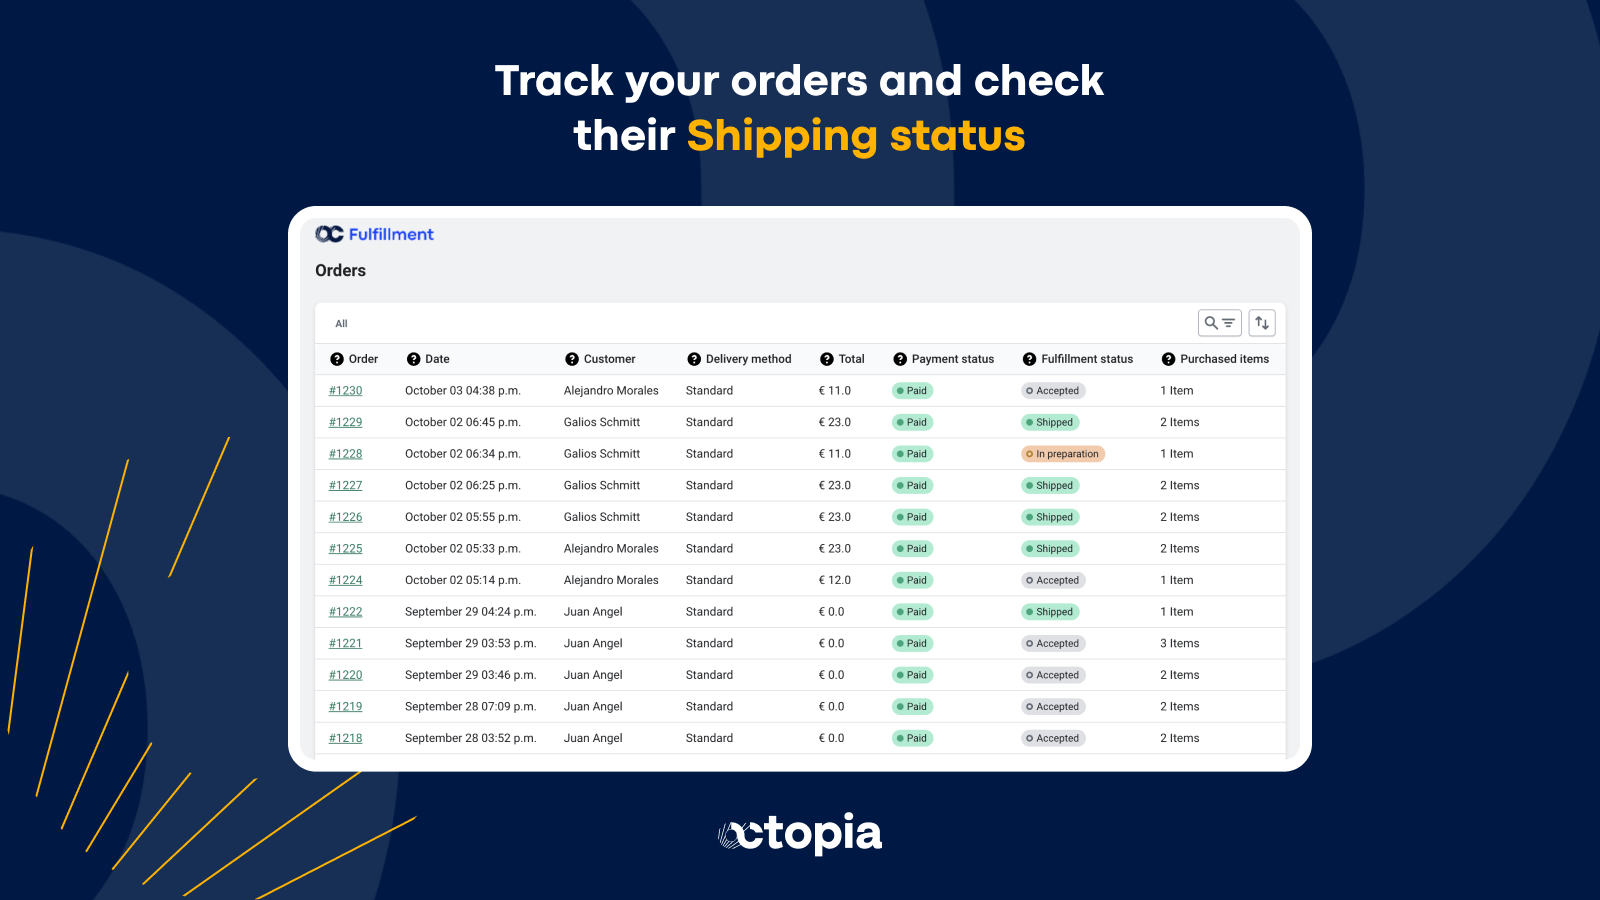 Track your orders and check their shipping status